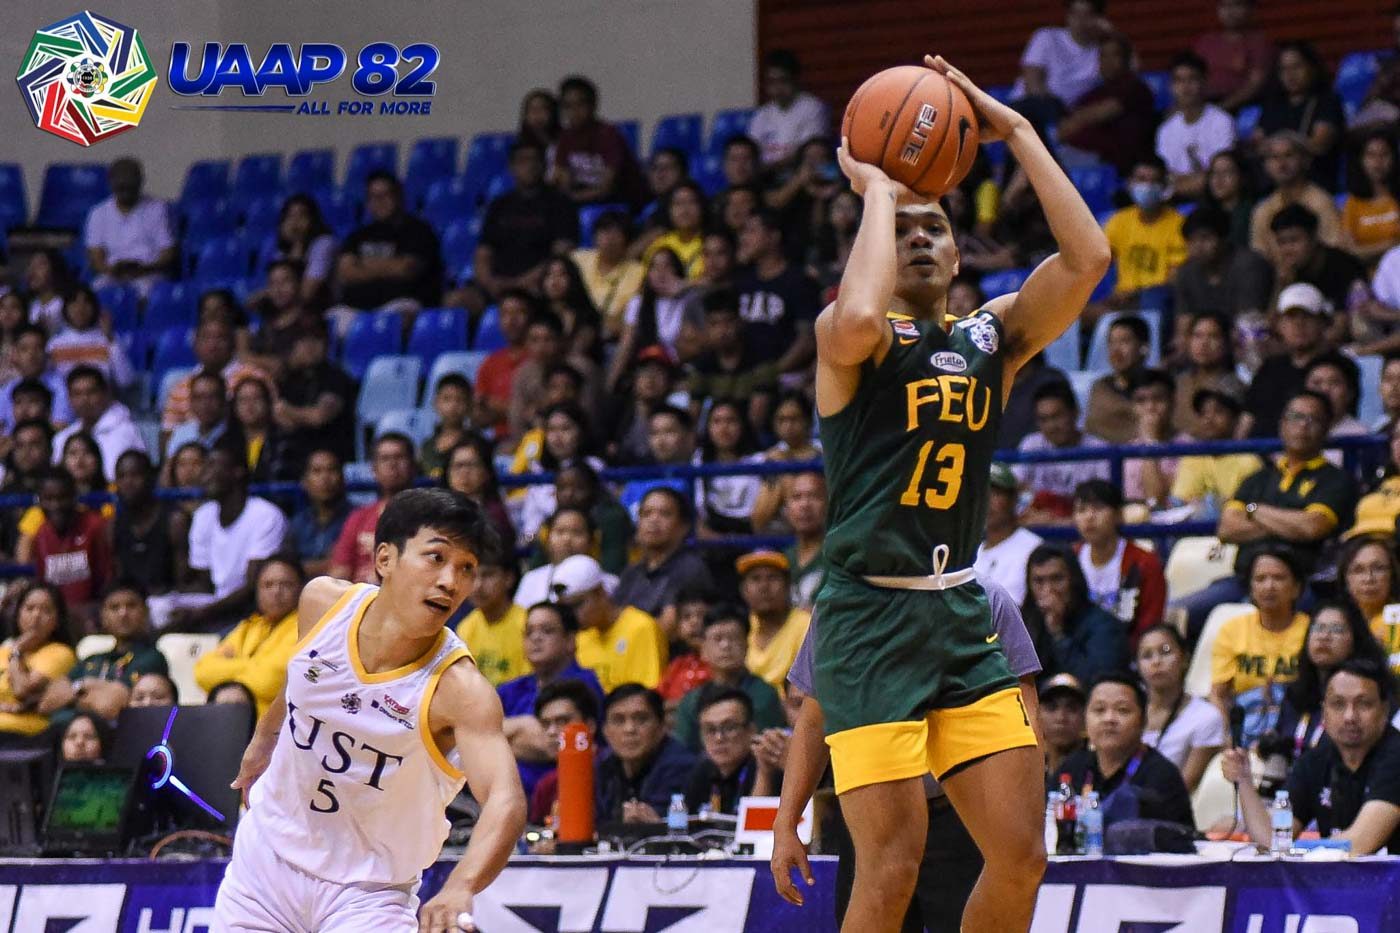 TOUGH LUCK. L-Jay Gonzales tries to help FEU regain its footing, but UST's shooting barrage proves too much. Photo release 